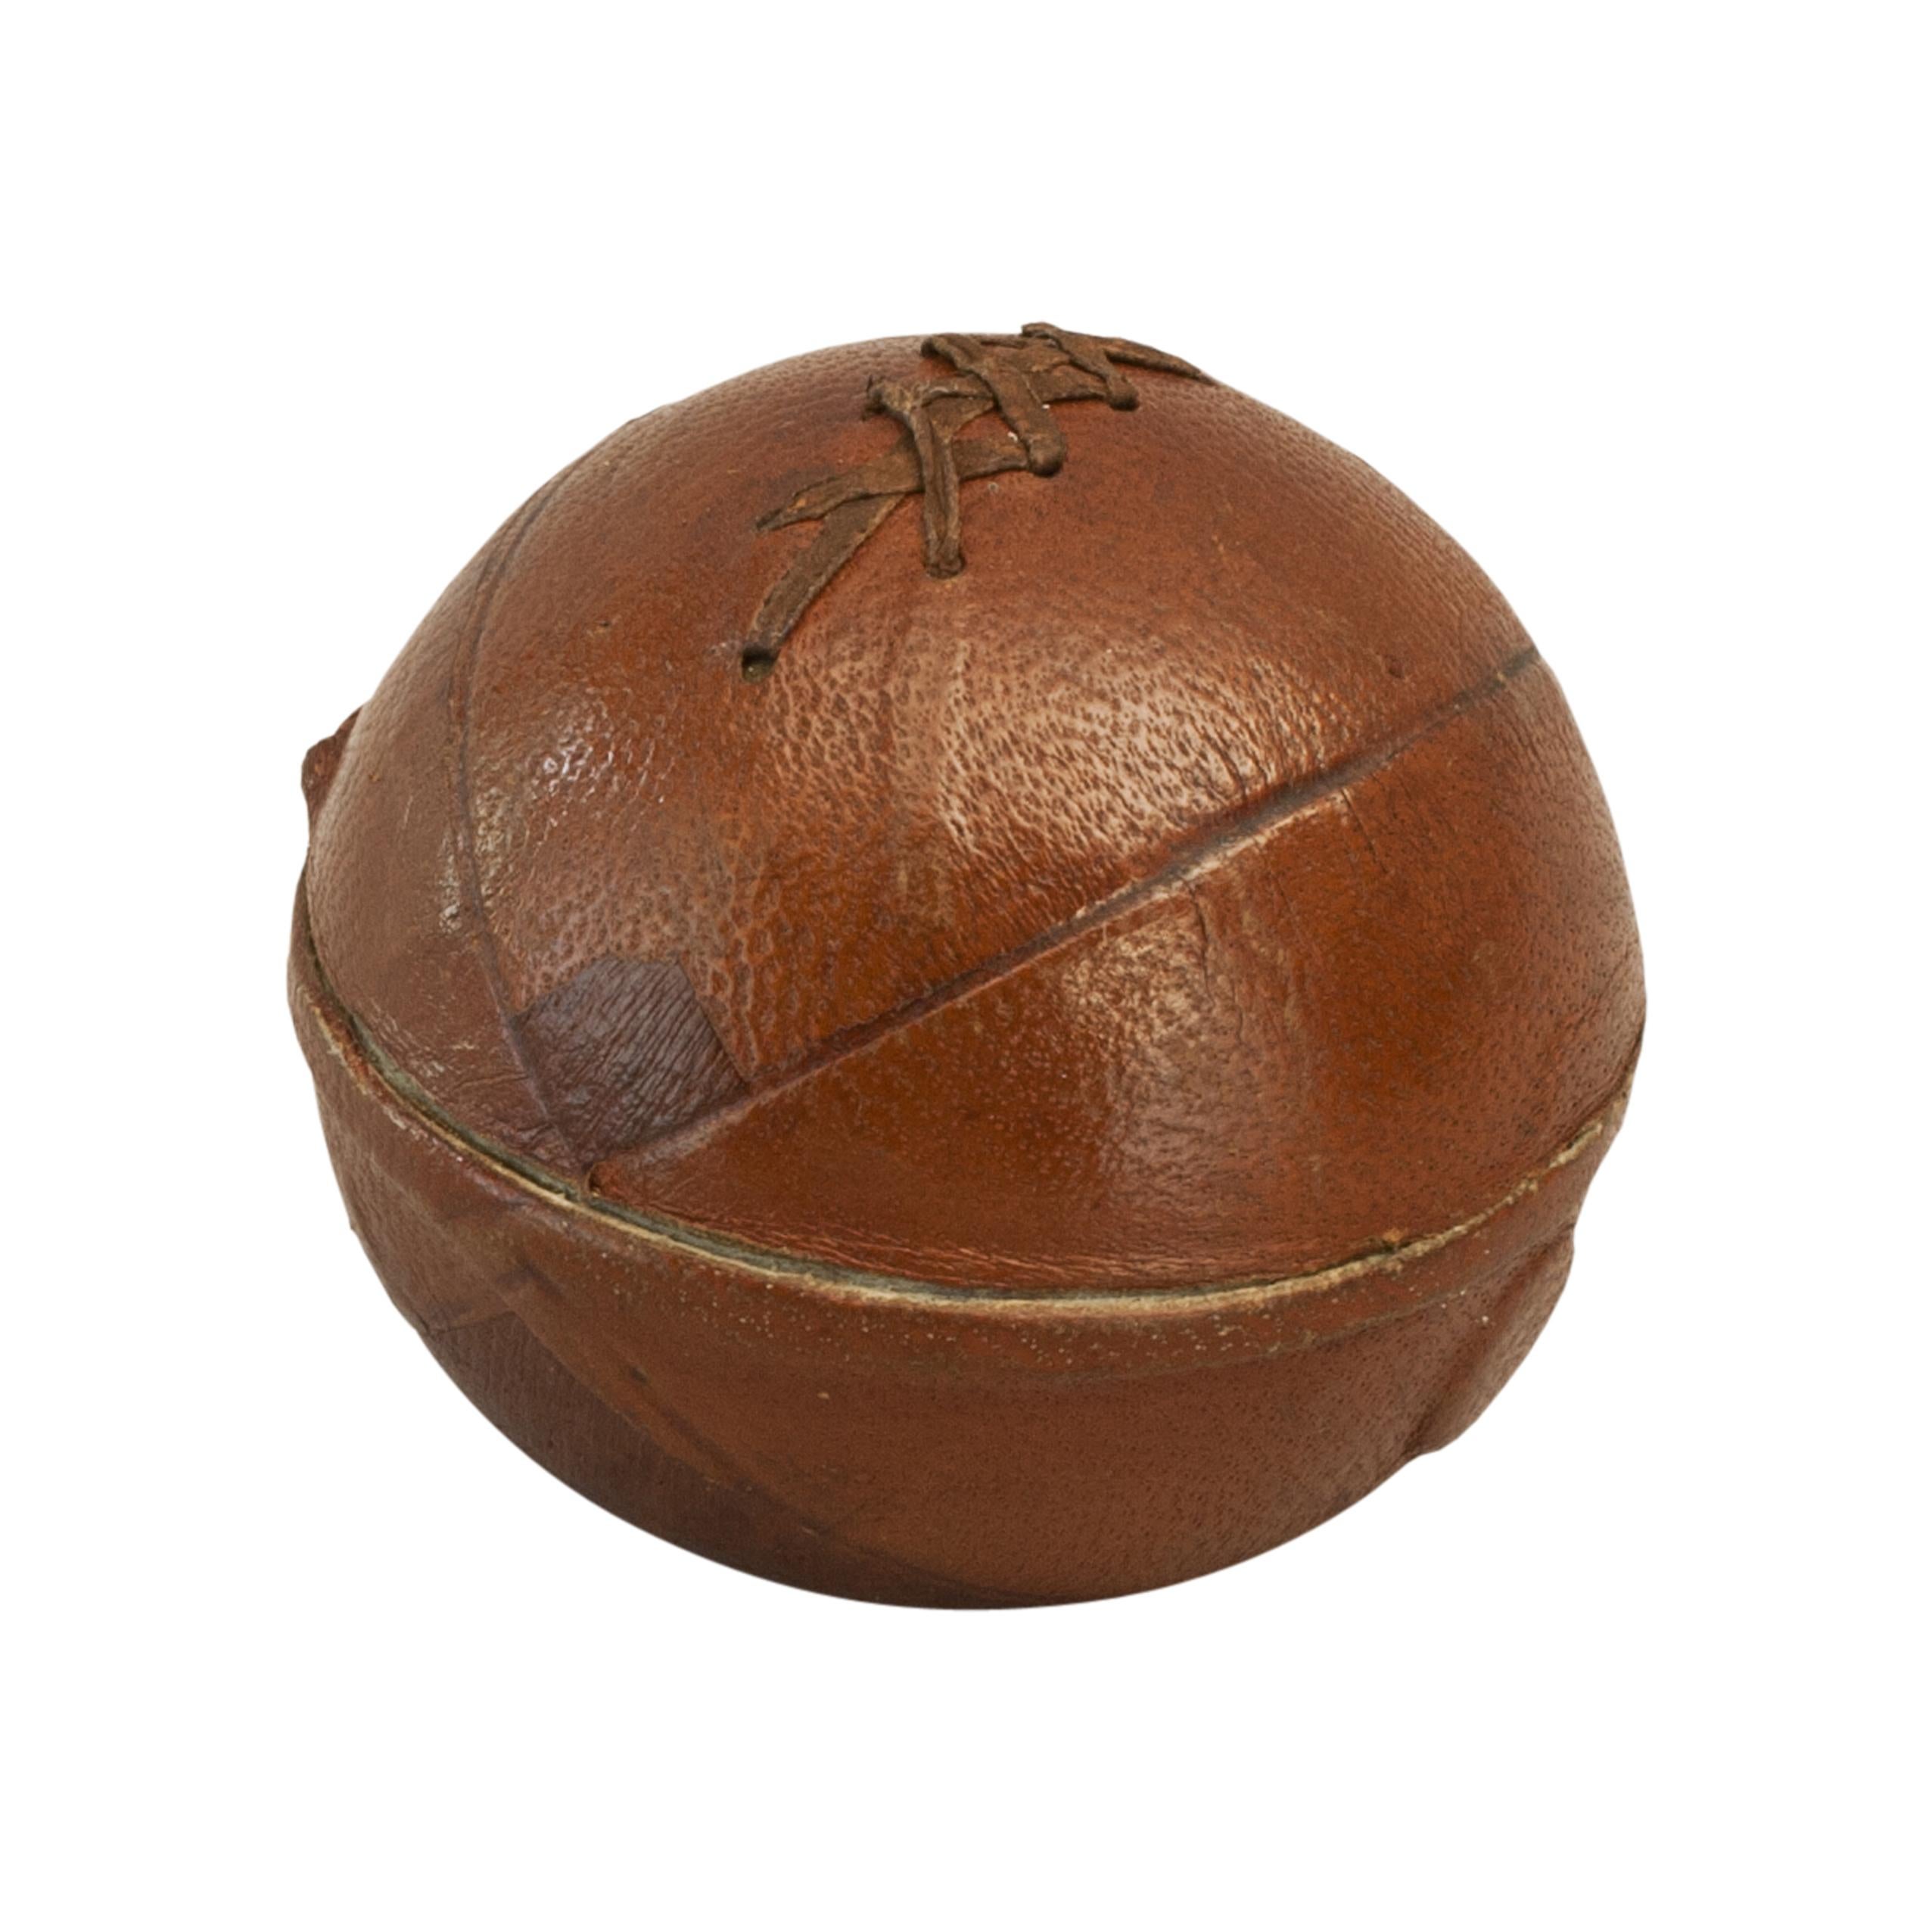 Vintage Football Inkwell With Leather Cover.